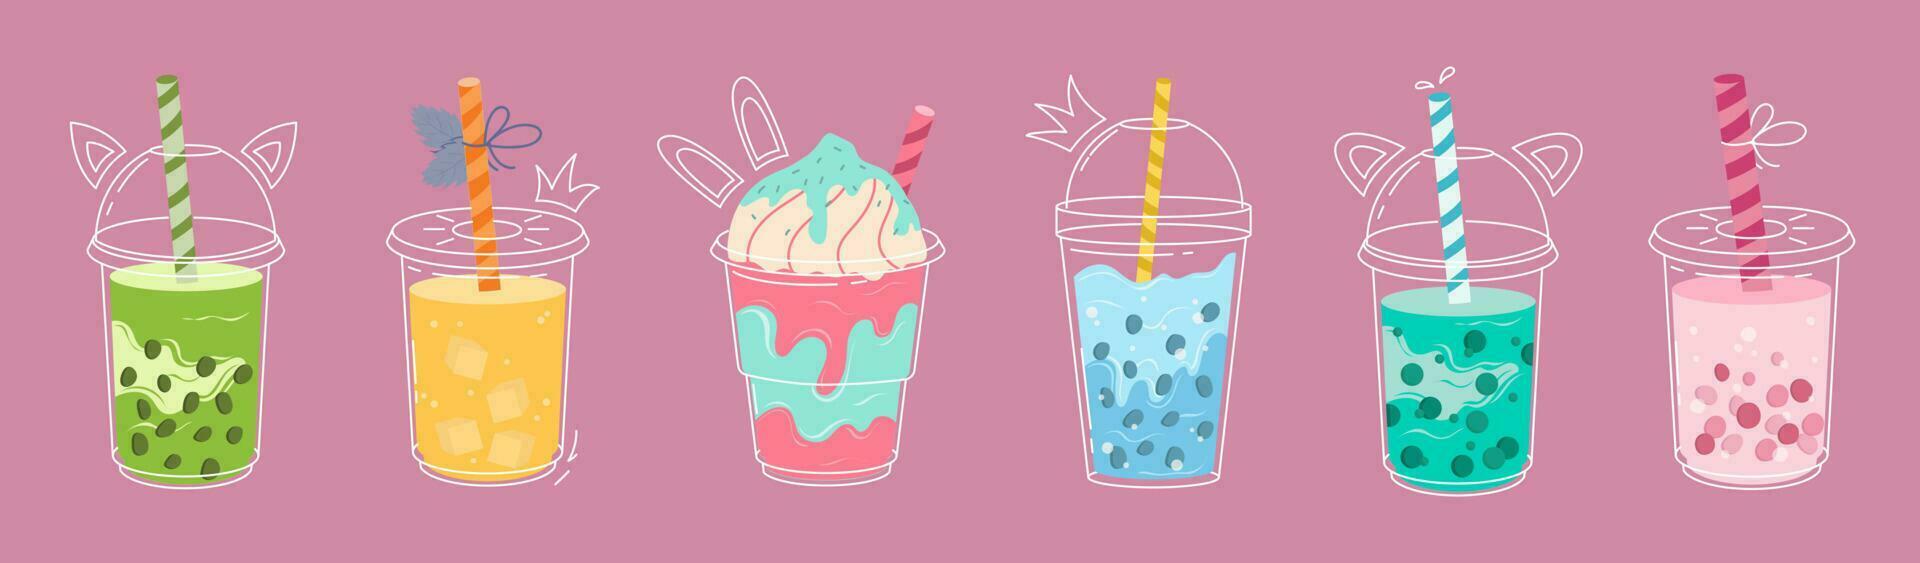 Bubble tea cup design collection, Pearl milk tea, Yummy drinks, coffees and soft drinks with doodle style banner. Colorful flat vector illustration. Boba Yummy Beverages in Glass or Plastic Cups.